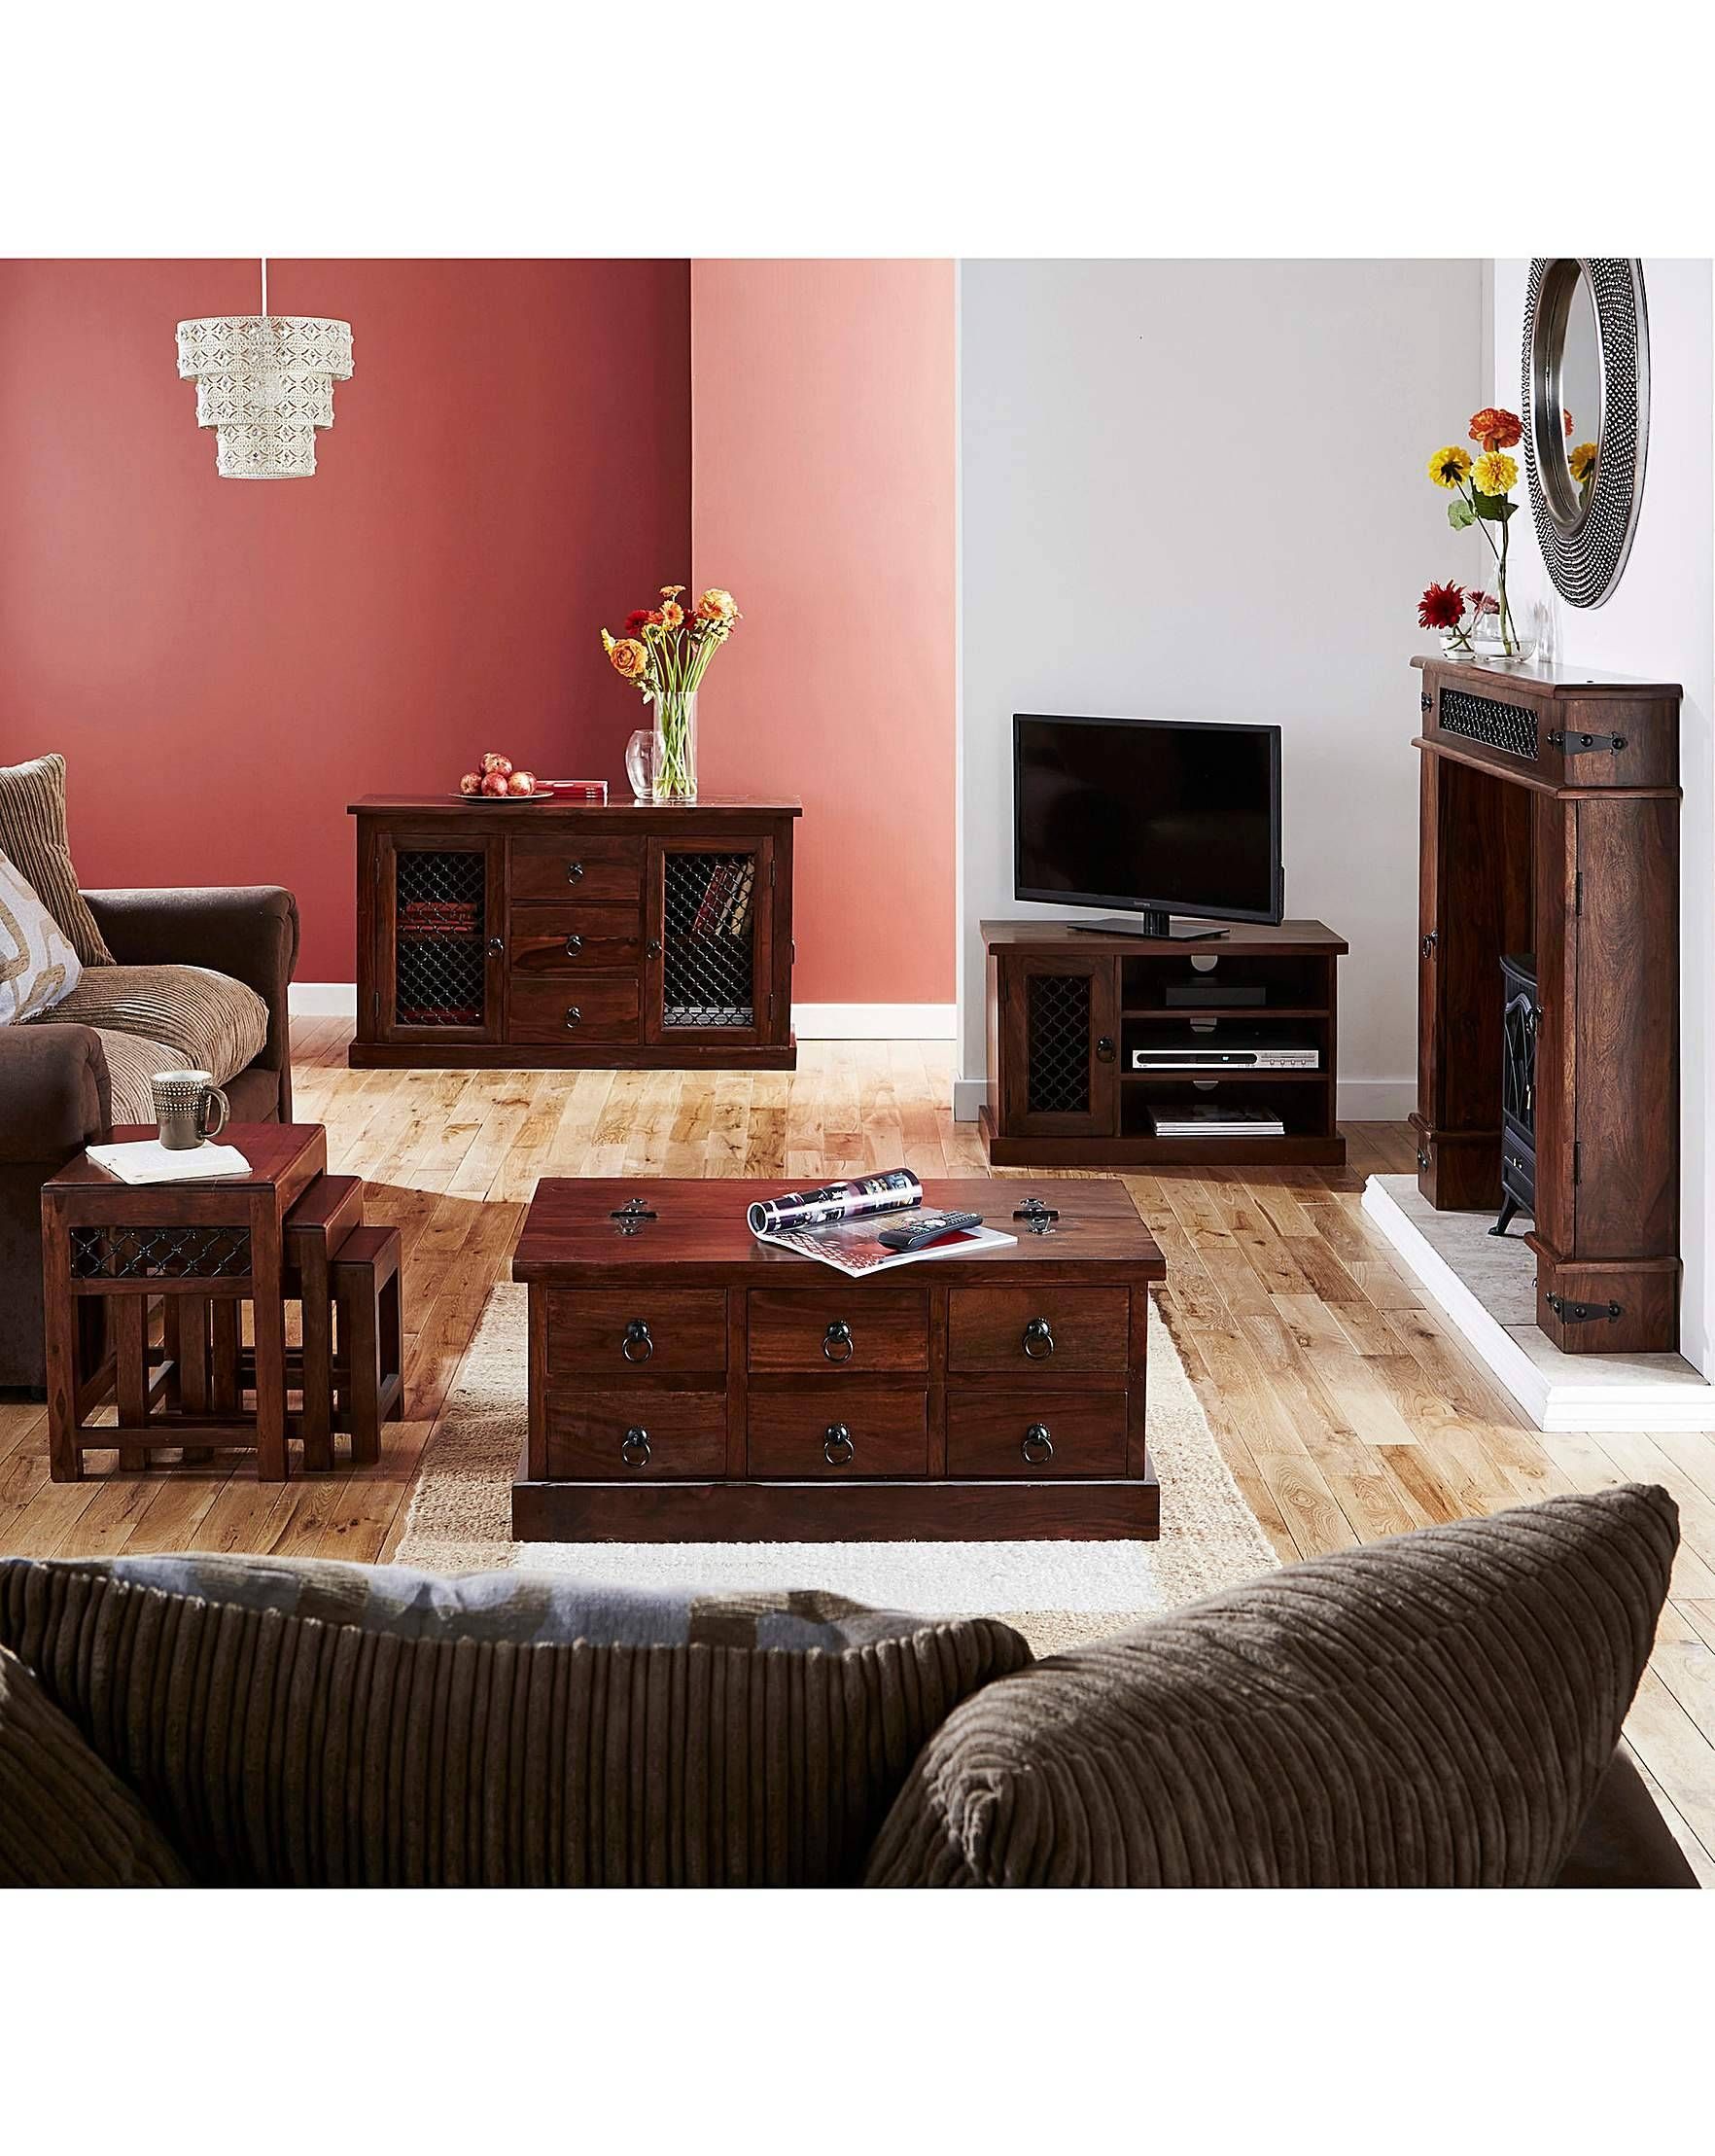 Jaipur Sheesham Coffee Table - Best 30+ of Jaipur Sheesham Coffee Tables / A wide variety of sheesham coffee table options are available to you, such as general use, wood style, and appearance.